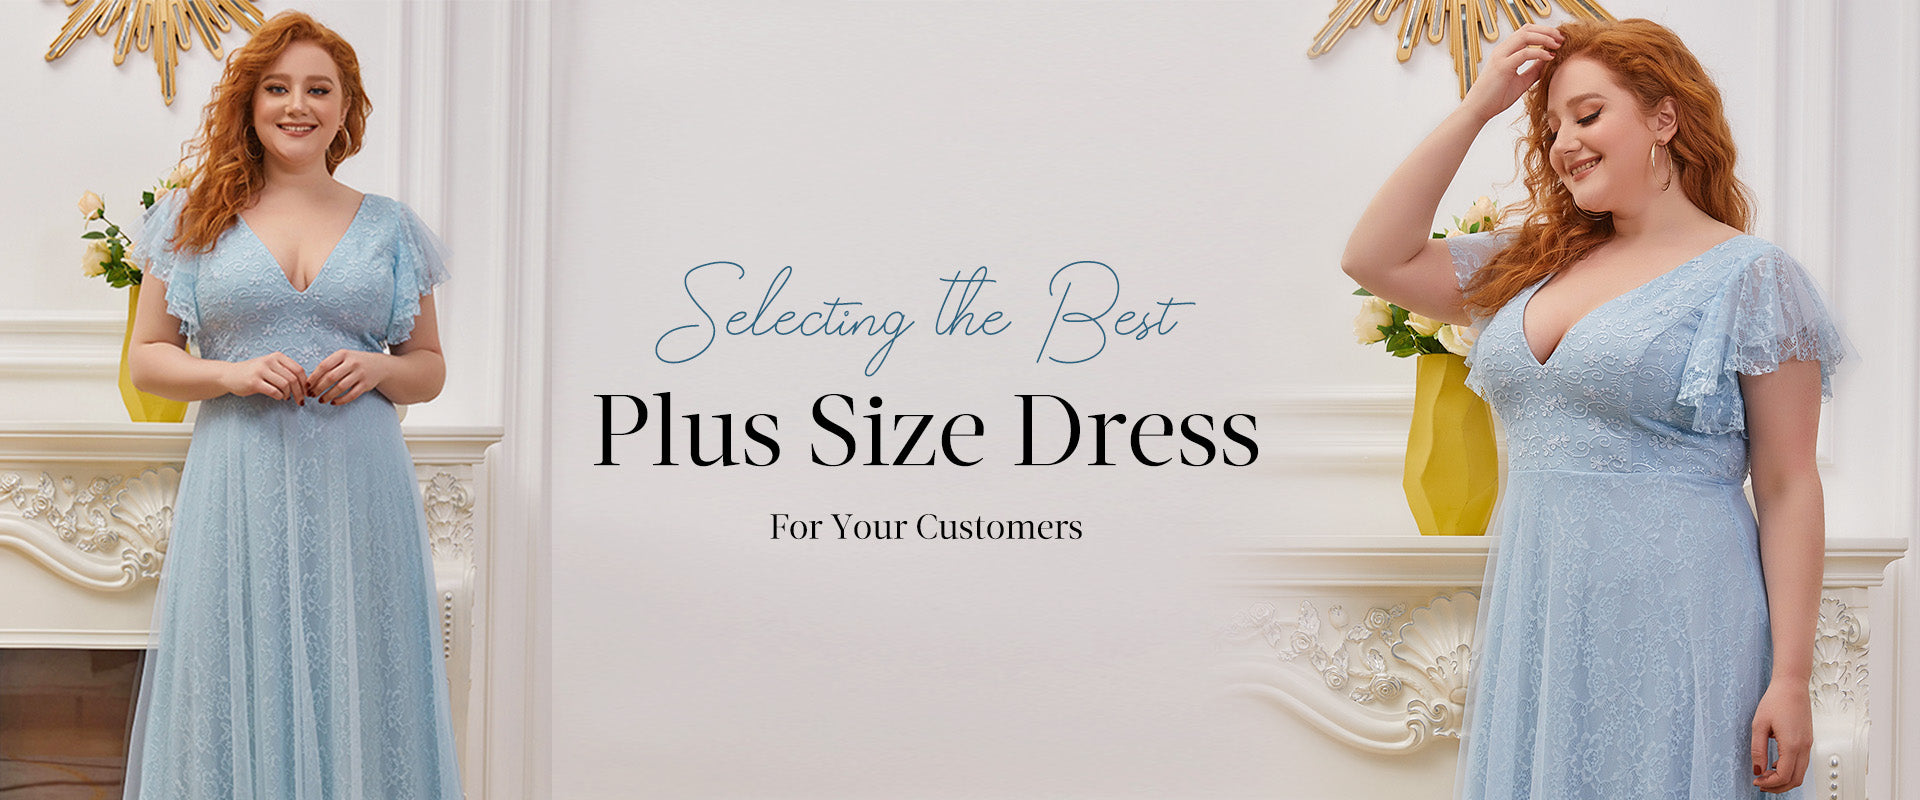 Selecting the Best Plus Size Dress for Your Customers